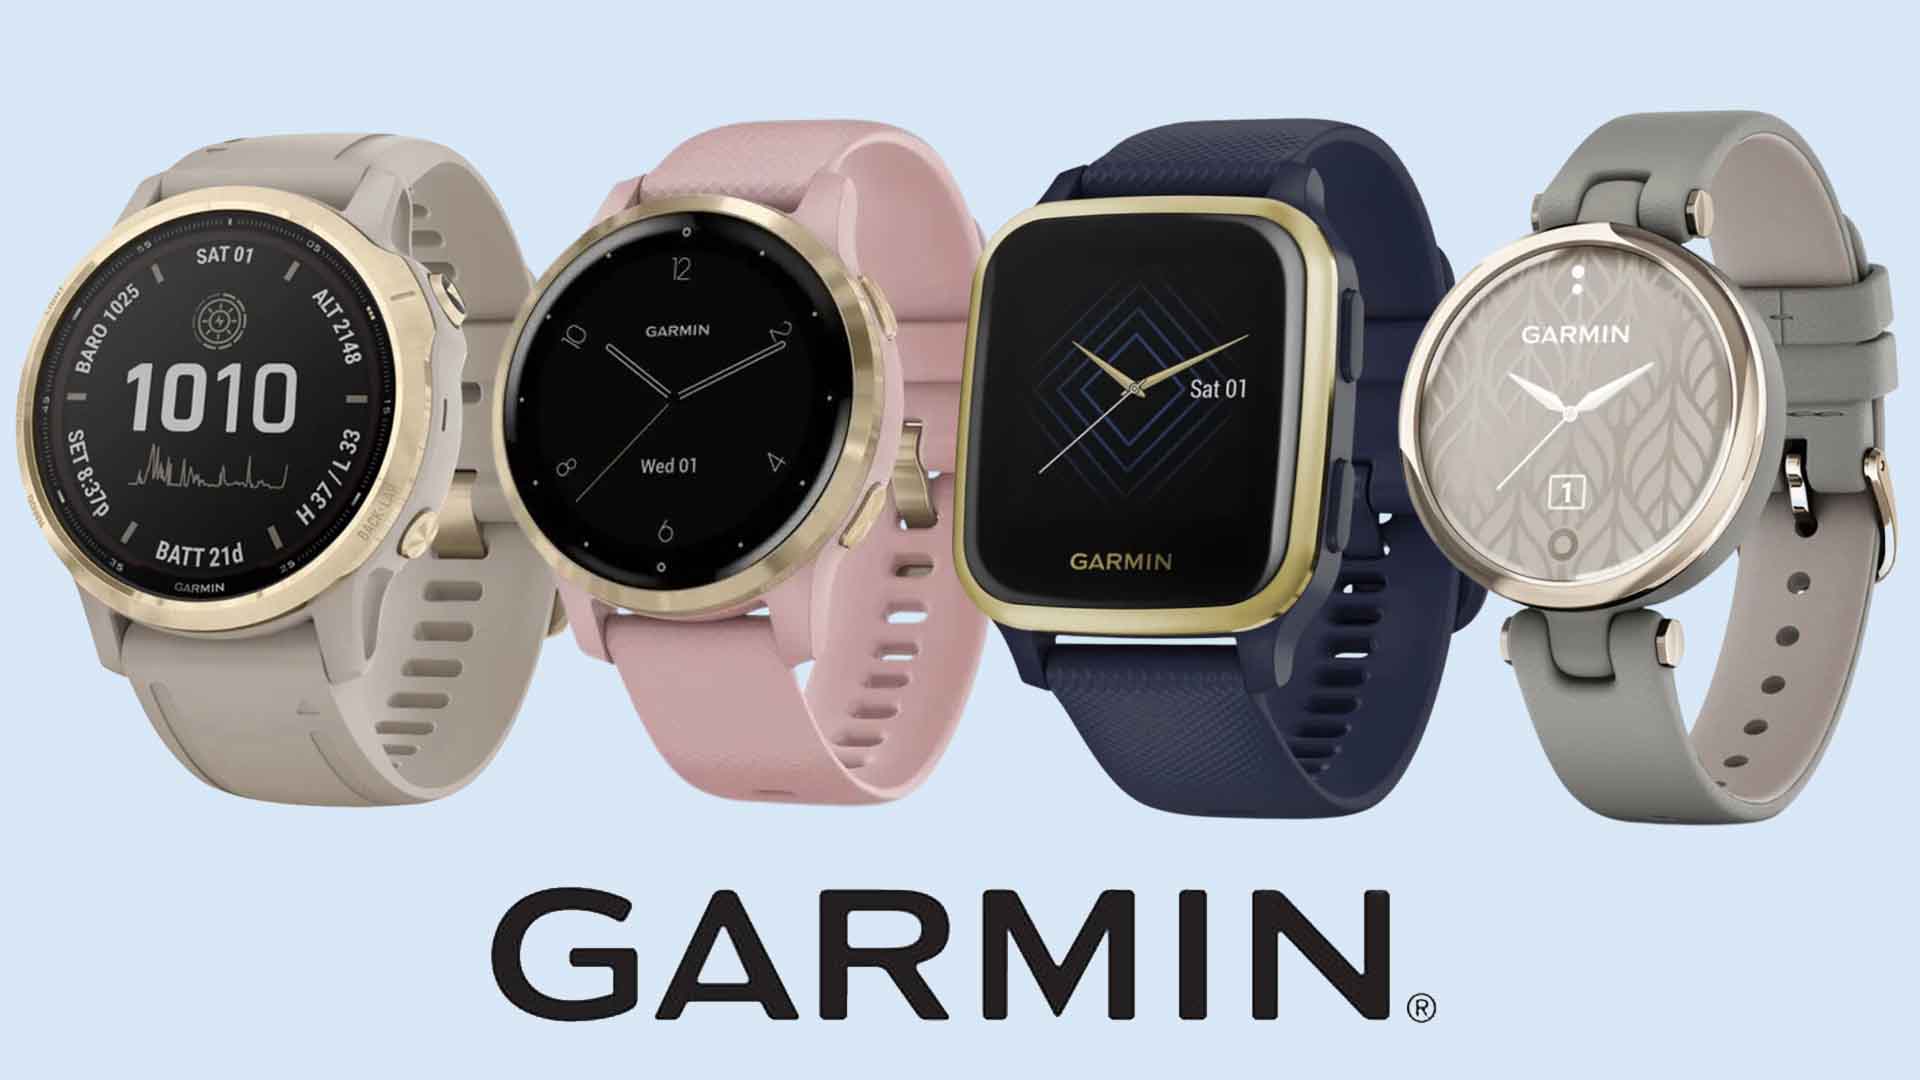 Garmin is running a mother-loving amazing watch sale right now